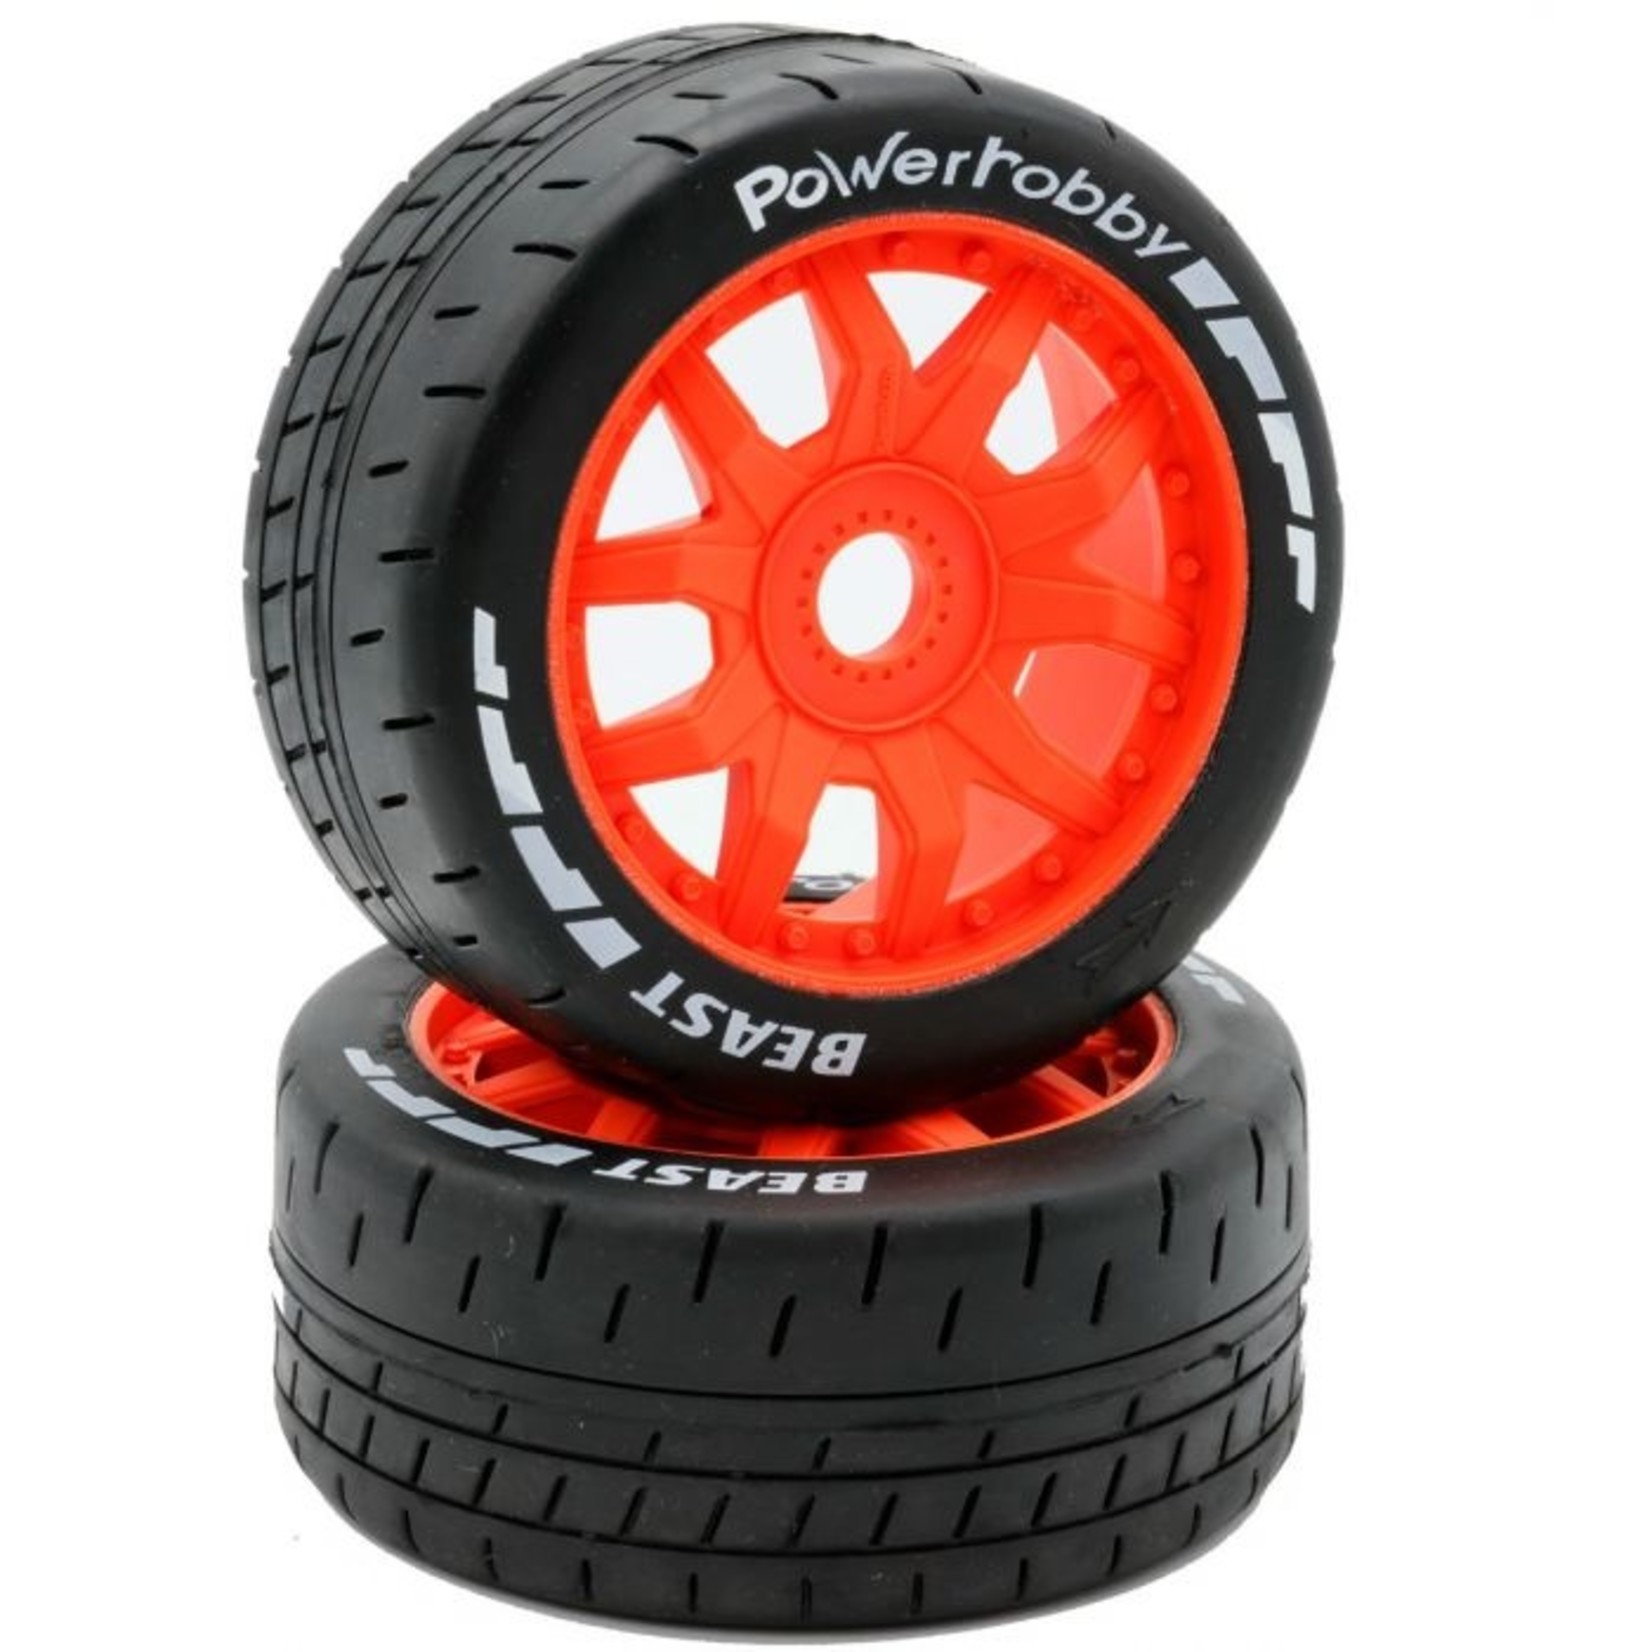 Power Hobby PHBPHT2401-SO - 1/8 GT Beast Belted Mounted Tires 17mm Soft Orange Wheels